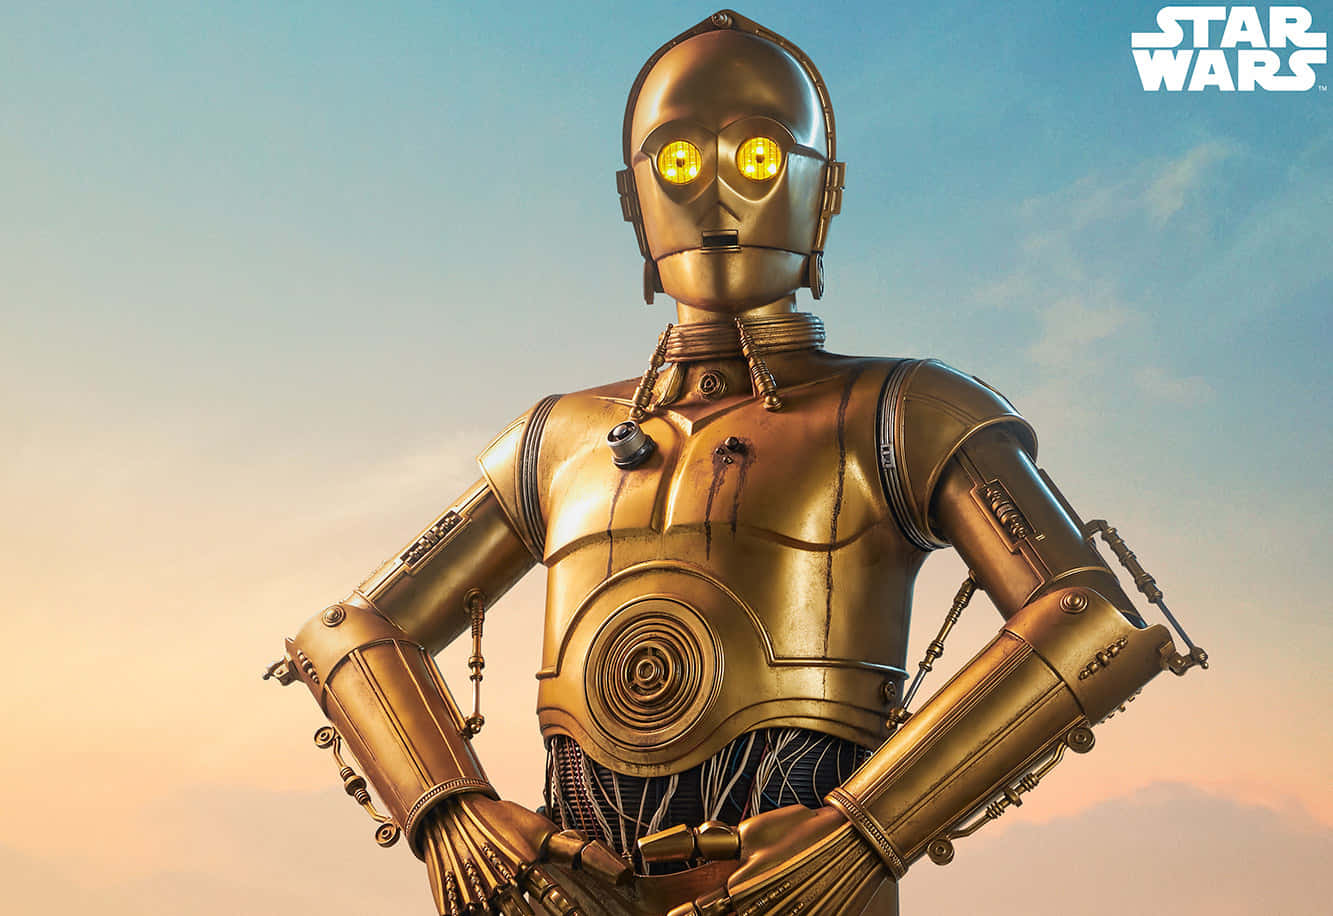 The iconic golden C-3PO against a dramatic black-and-white background Wallpaper